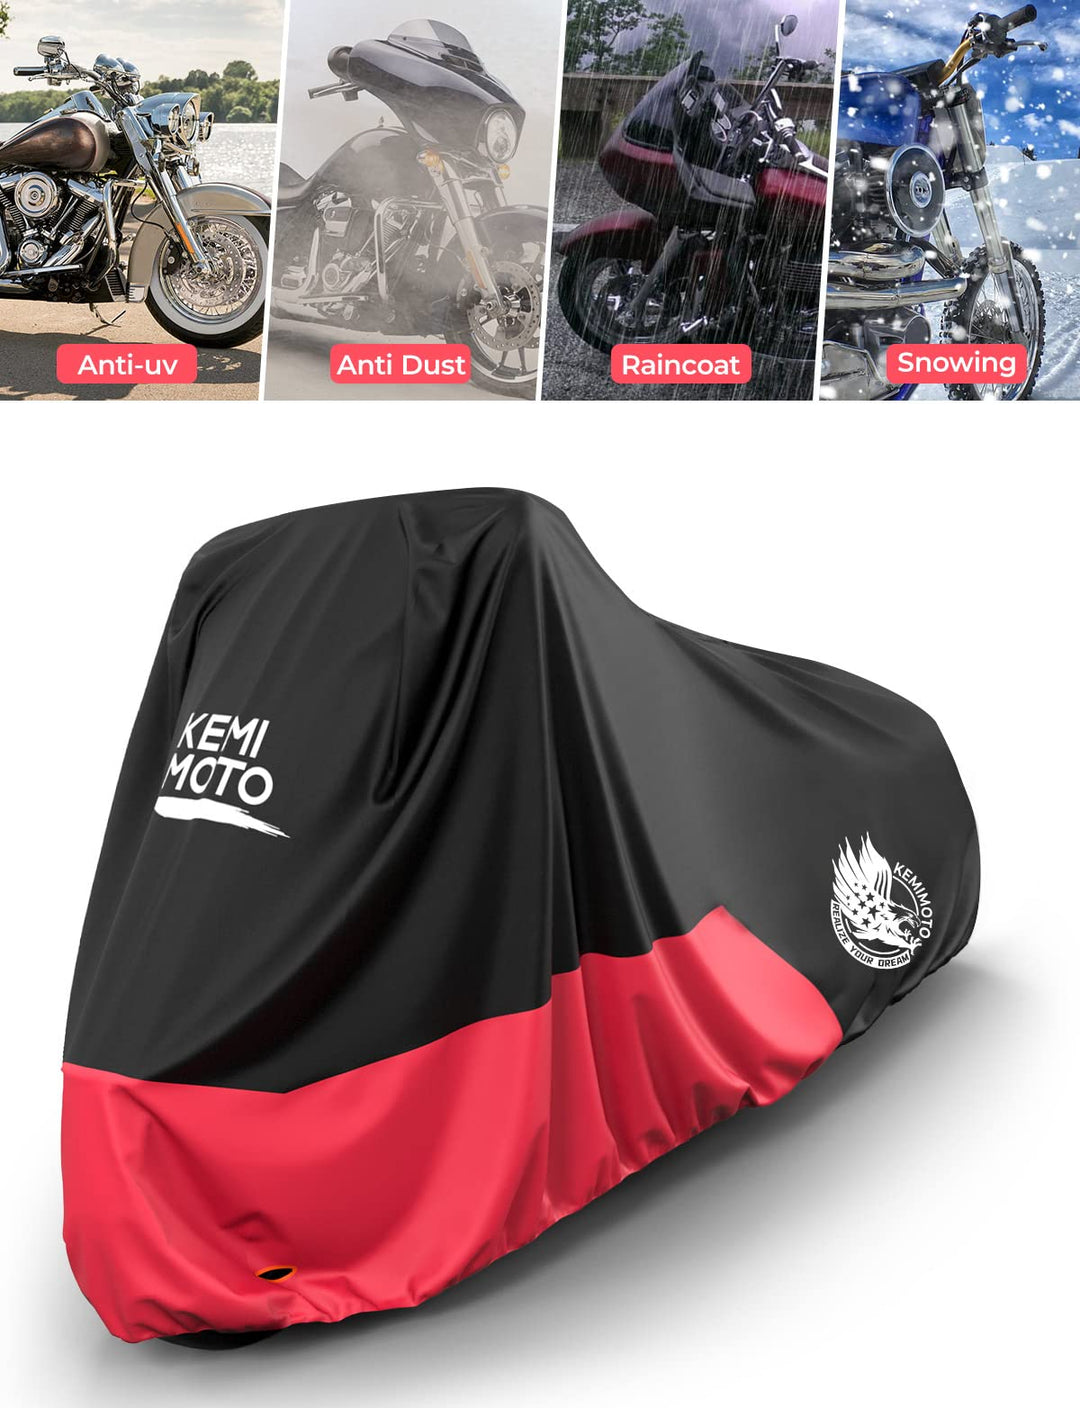 Dirt Bike Cover for Softail, Dyna Models, Shadow Cruiser - Kemimoto